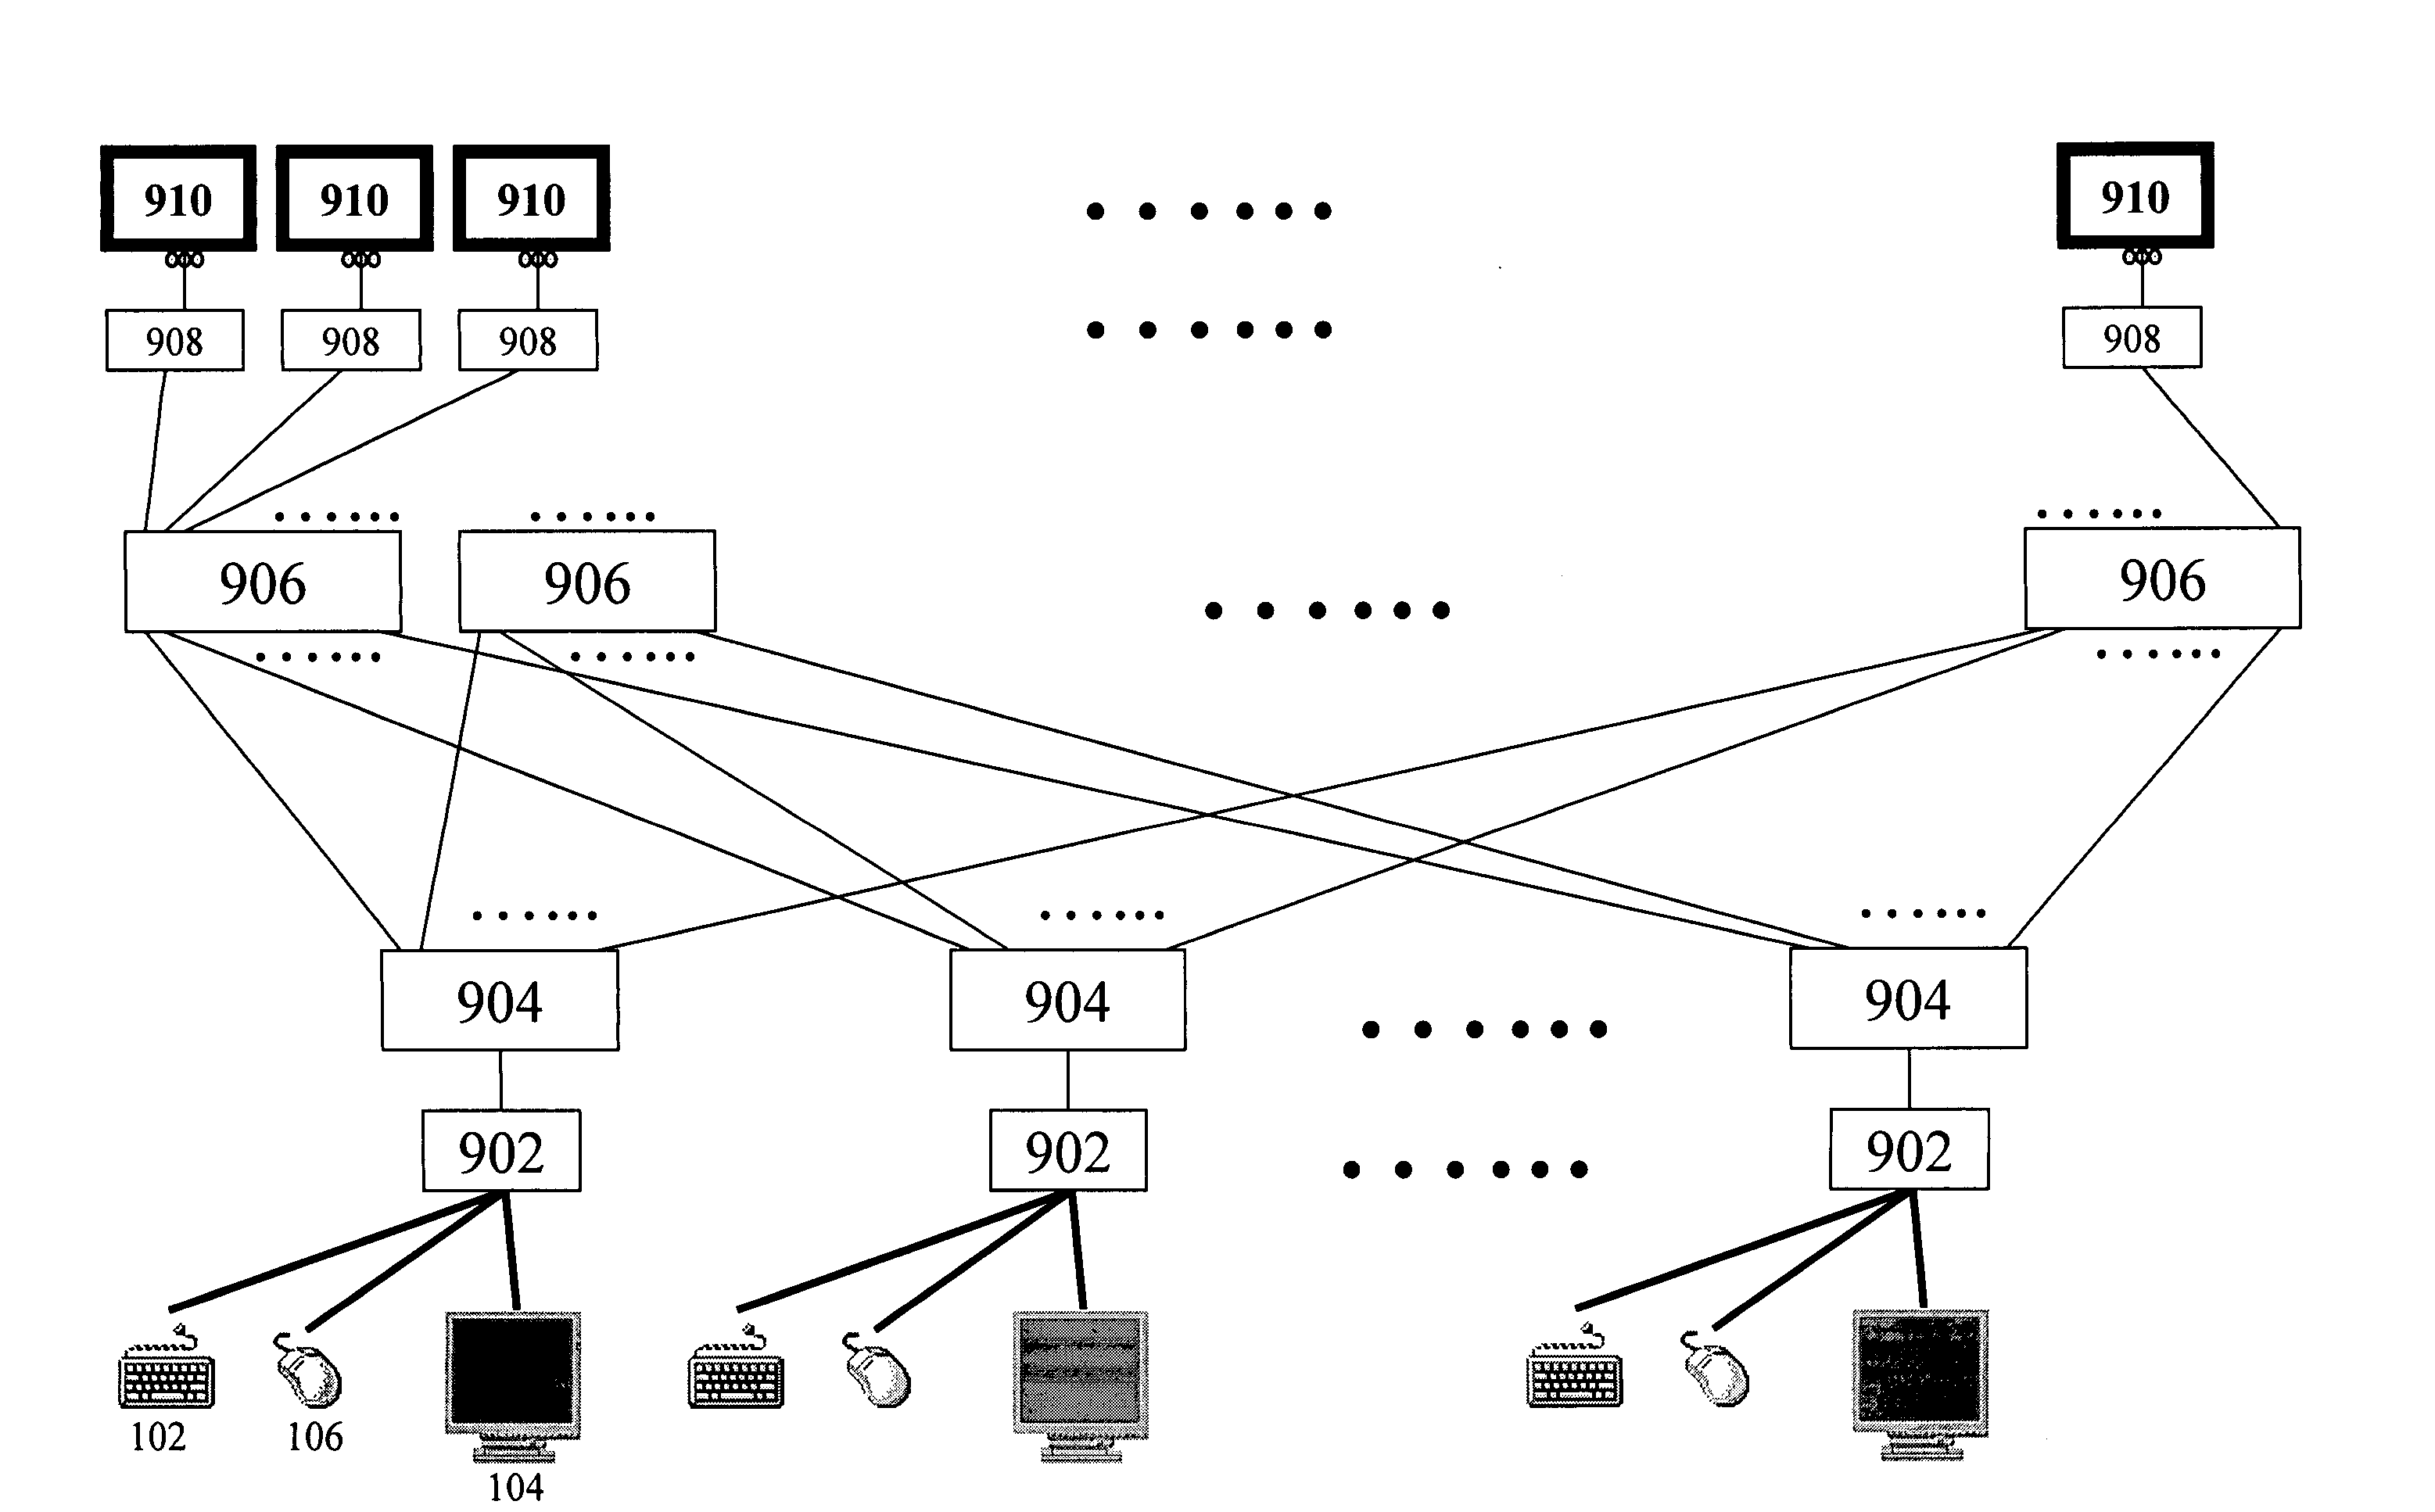 Intelligent modular server management system for selectively operating a plurality of computers